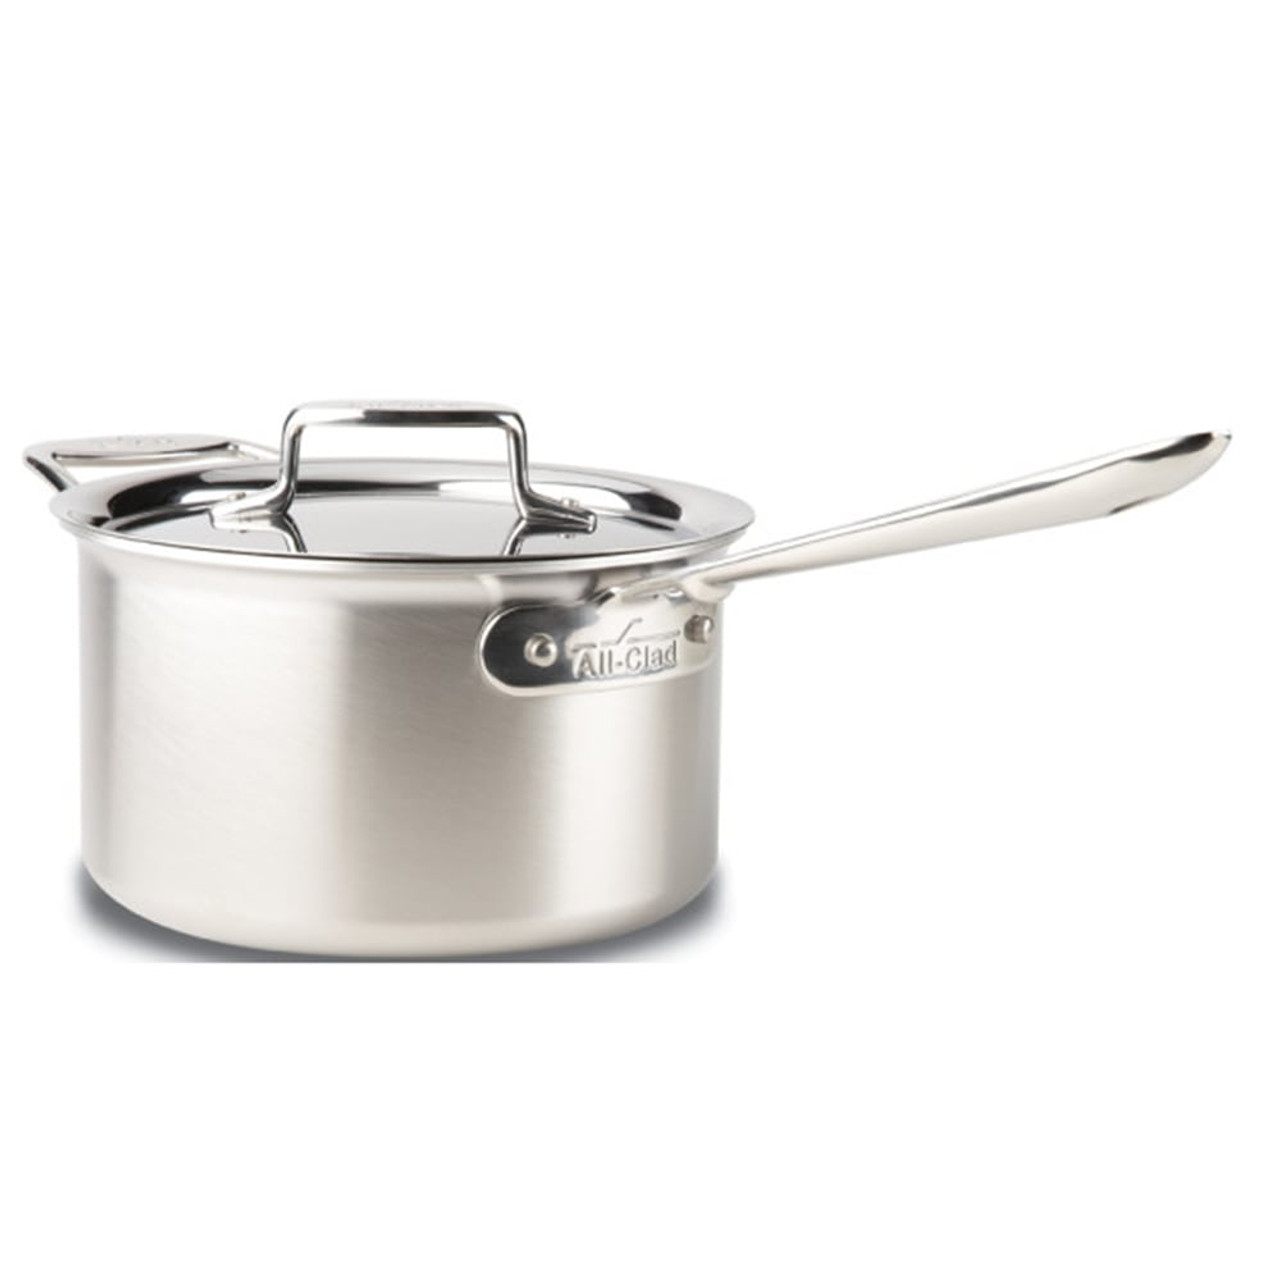 All-Clad Cookware Is Up to 50% Off at  Right Now—These Are